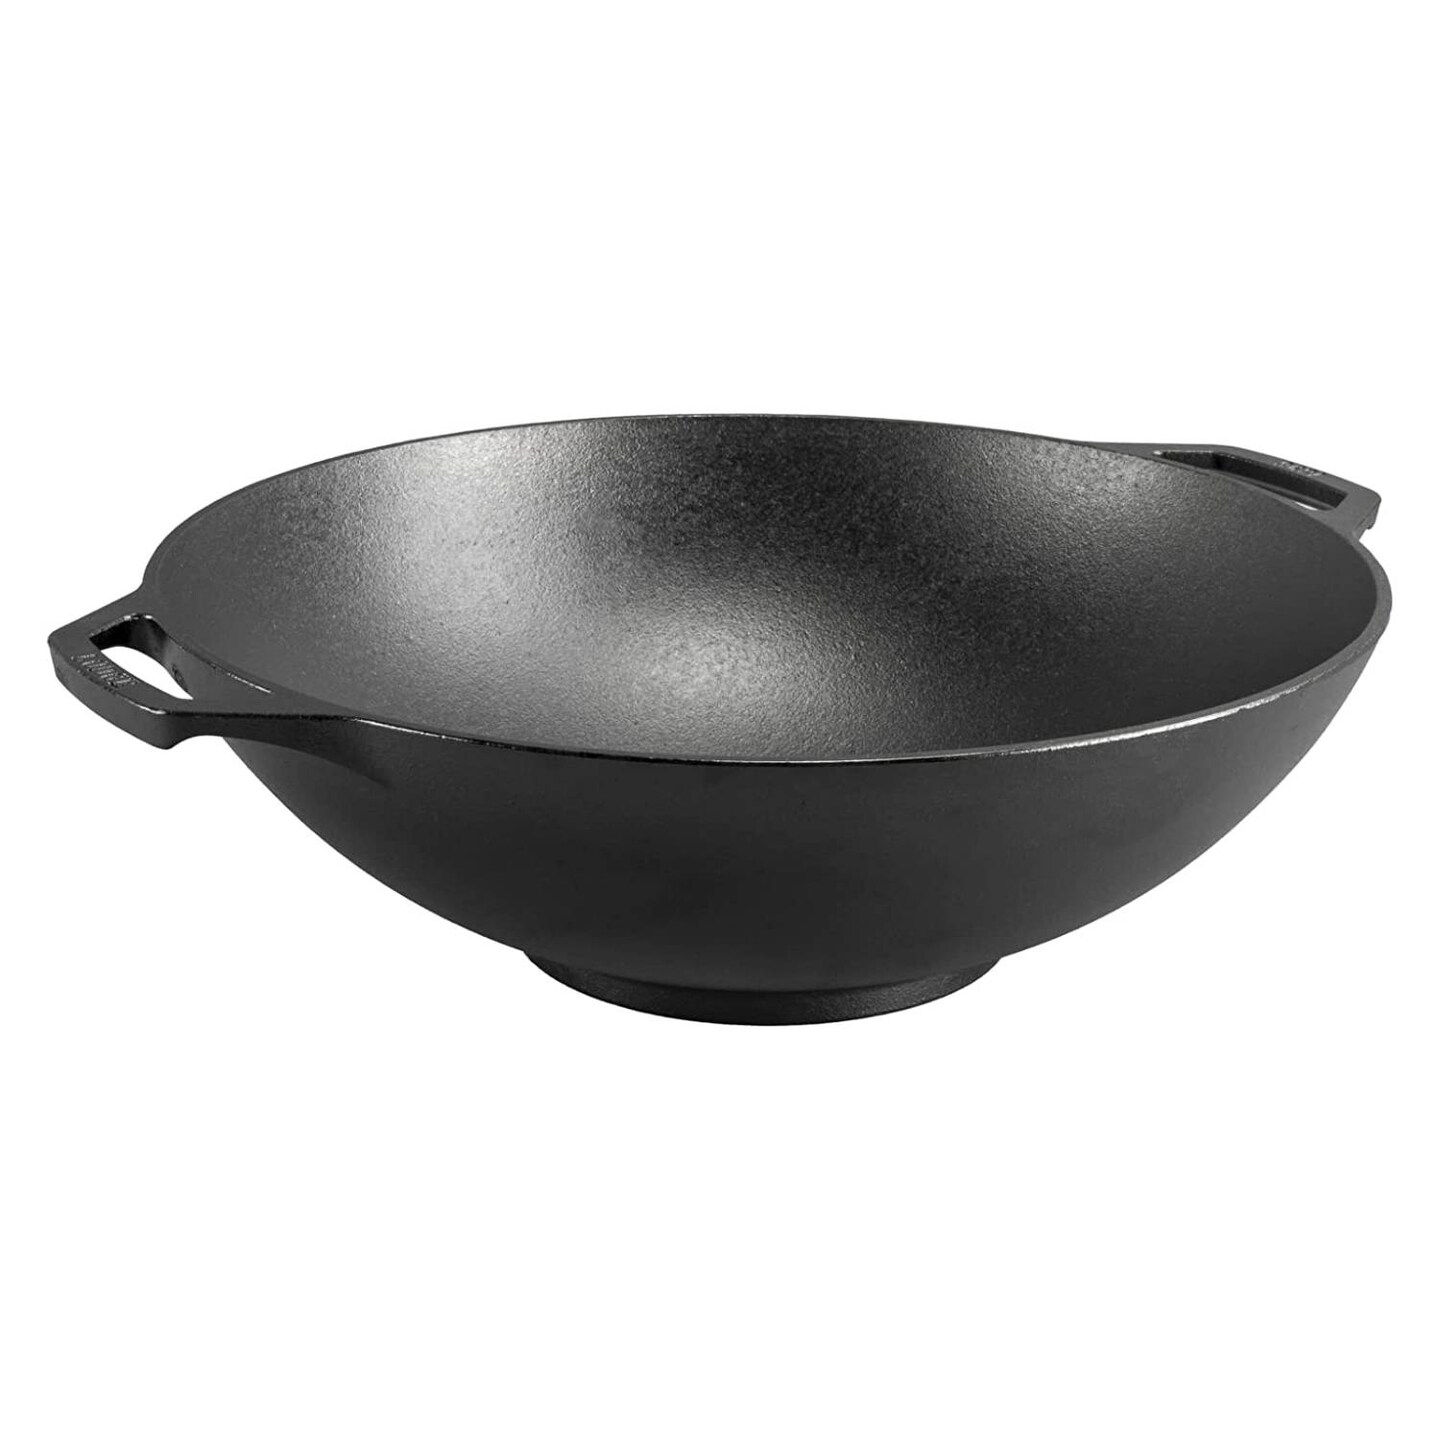 Lodge Cast Iron Cooking Wok, L14W, Bowl Shaped, Retains Heat, Wide 14 inch  Top x 6 inch Base